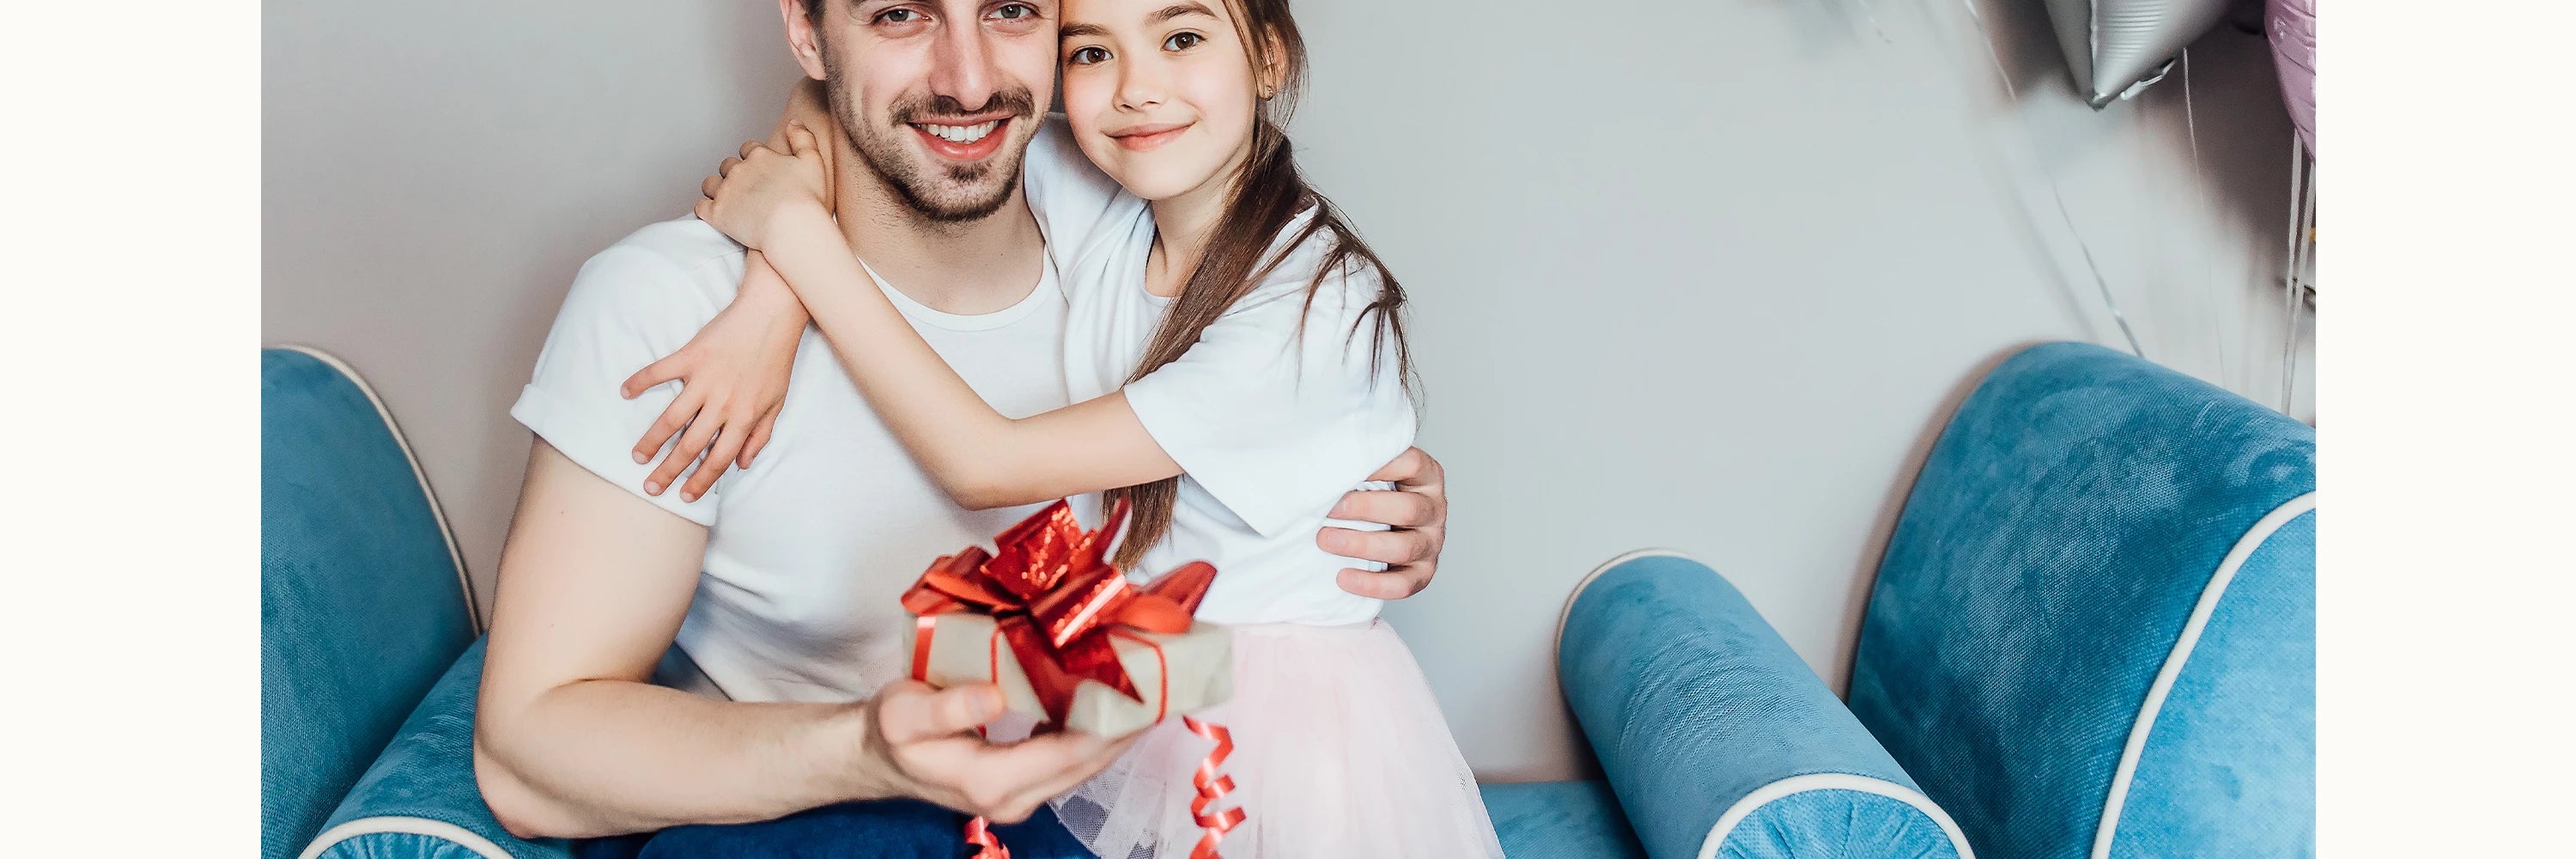 Best Father's Day Gifts: 39 Ideas for Dads, Stepfathers, and In-Laws | TIME  Stamped